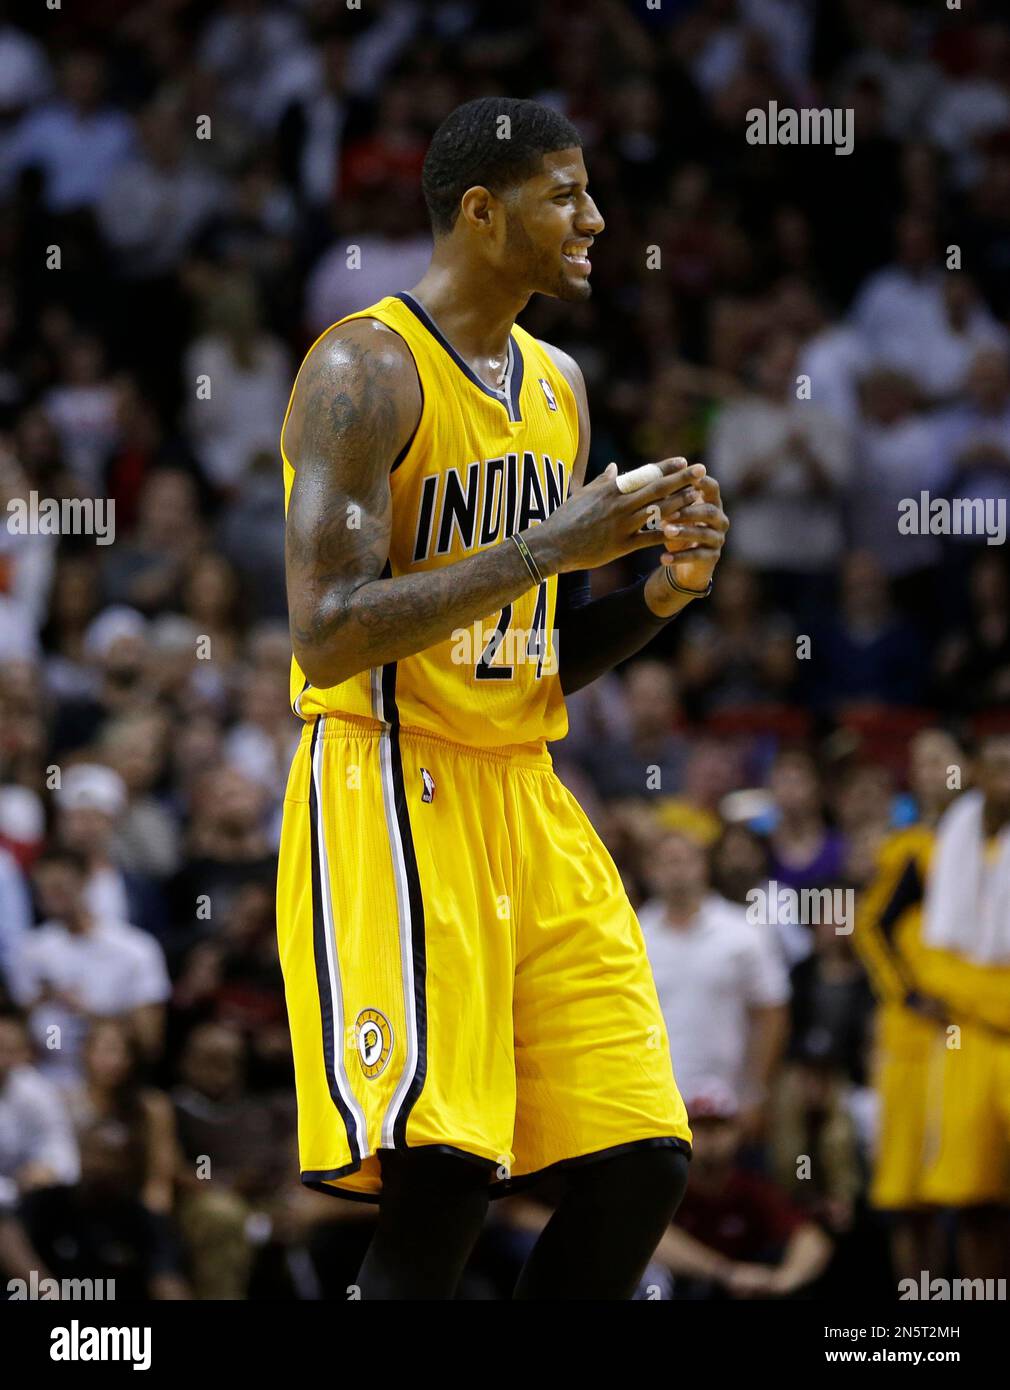 Indiana Pacers' Paul George (24) reacts after fouling in the second half of  an NBA basketball game against the Miami Heat, Wednesday, Dec. 18, 2013, in  Miami. The Heat defeated the Pacers